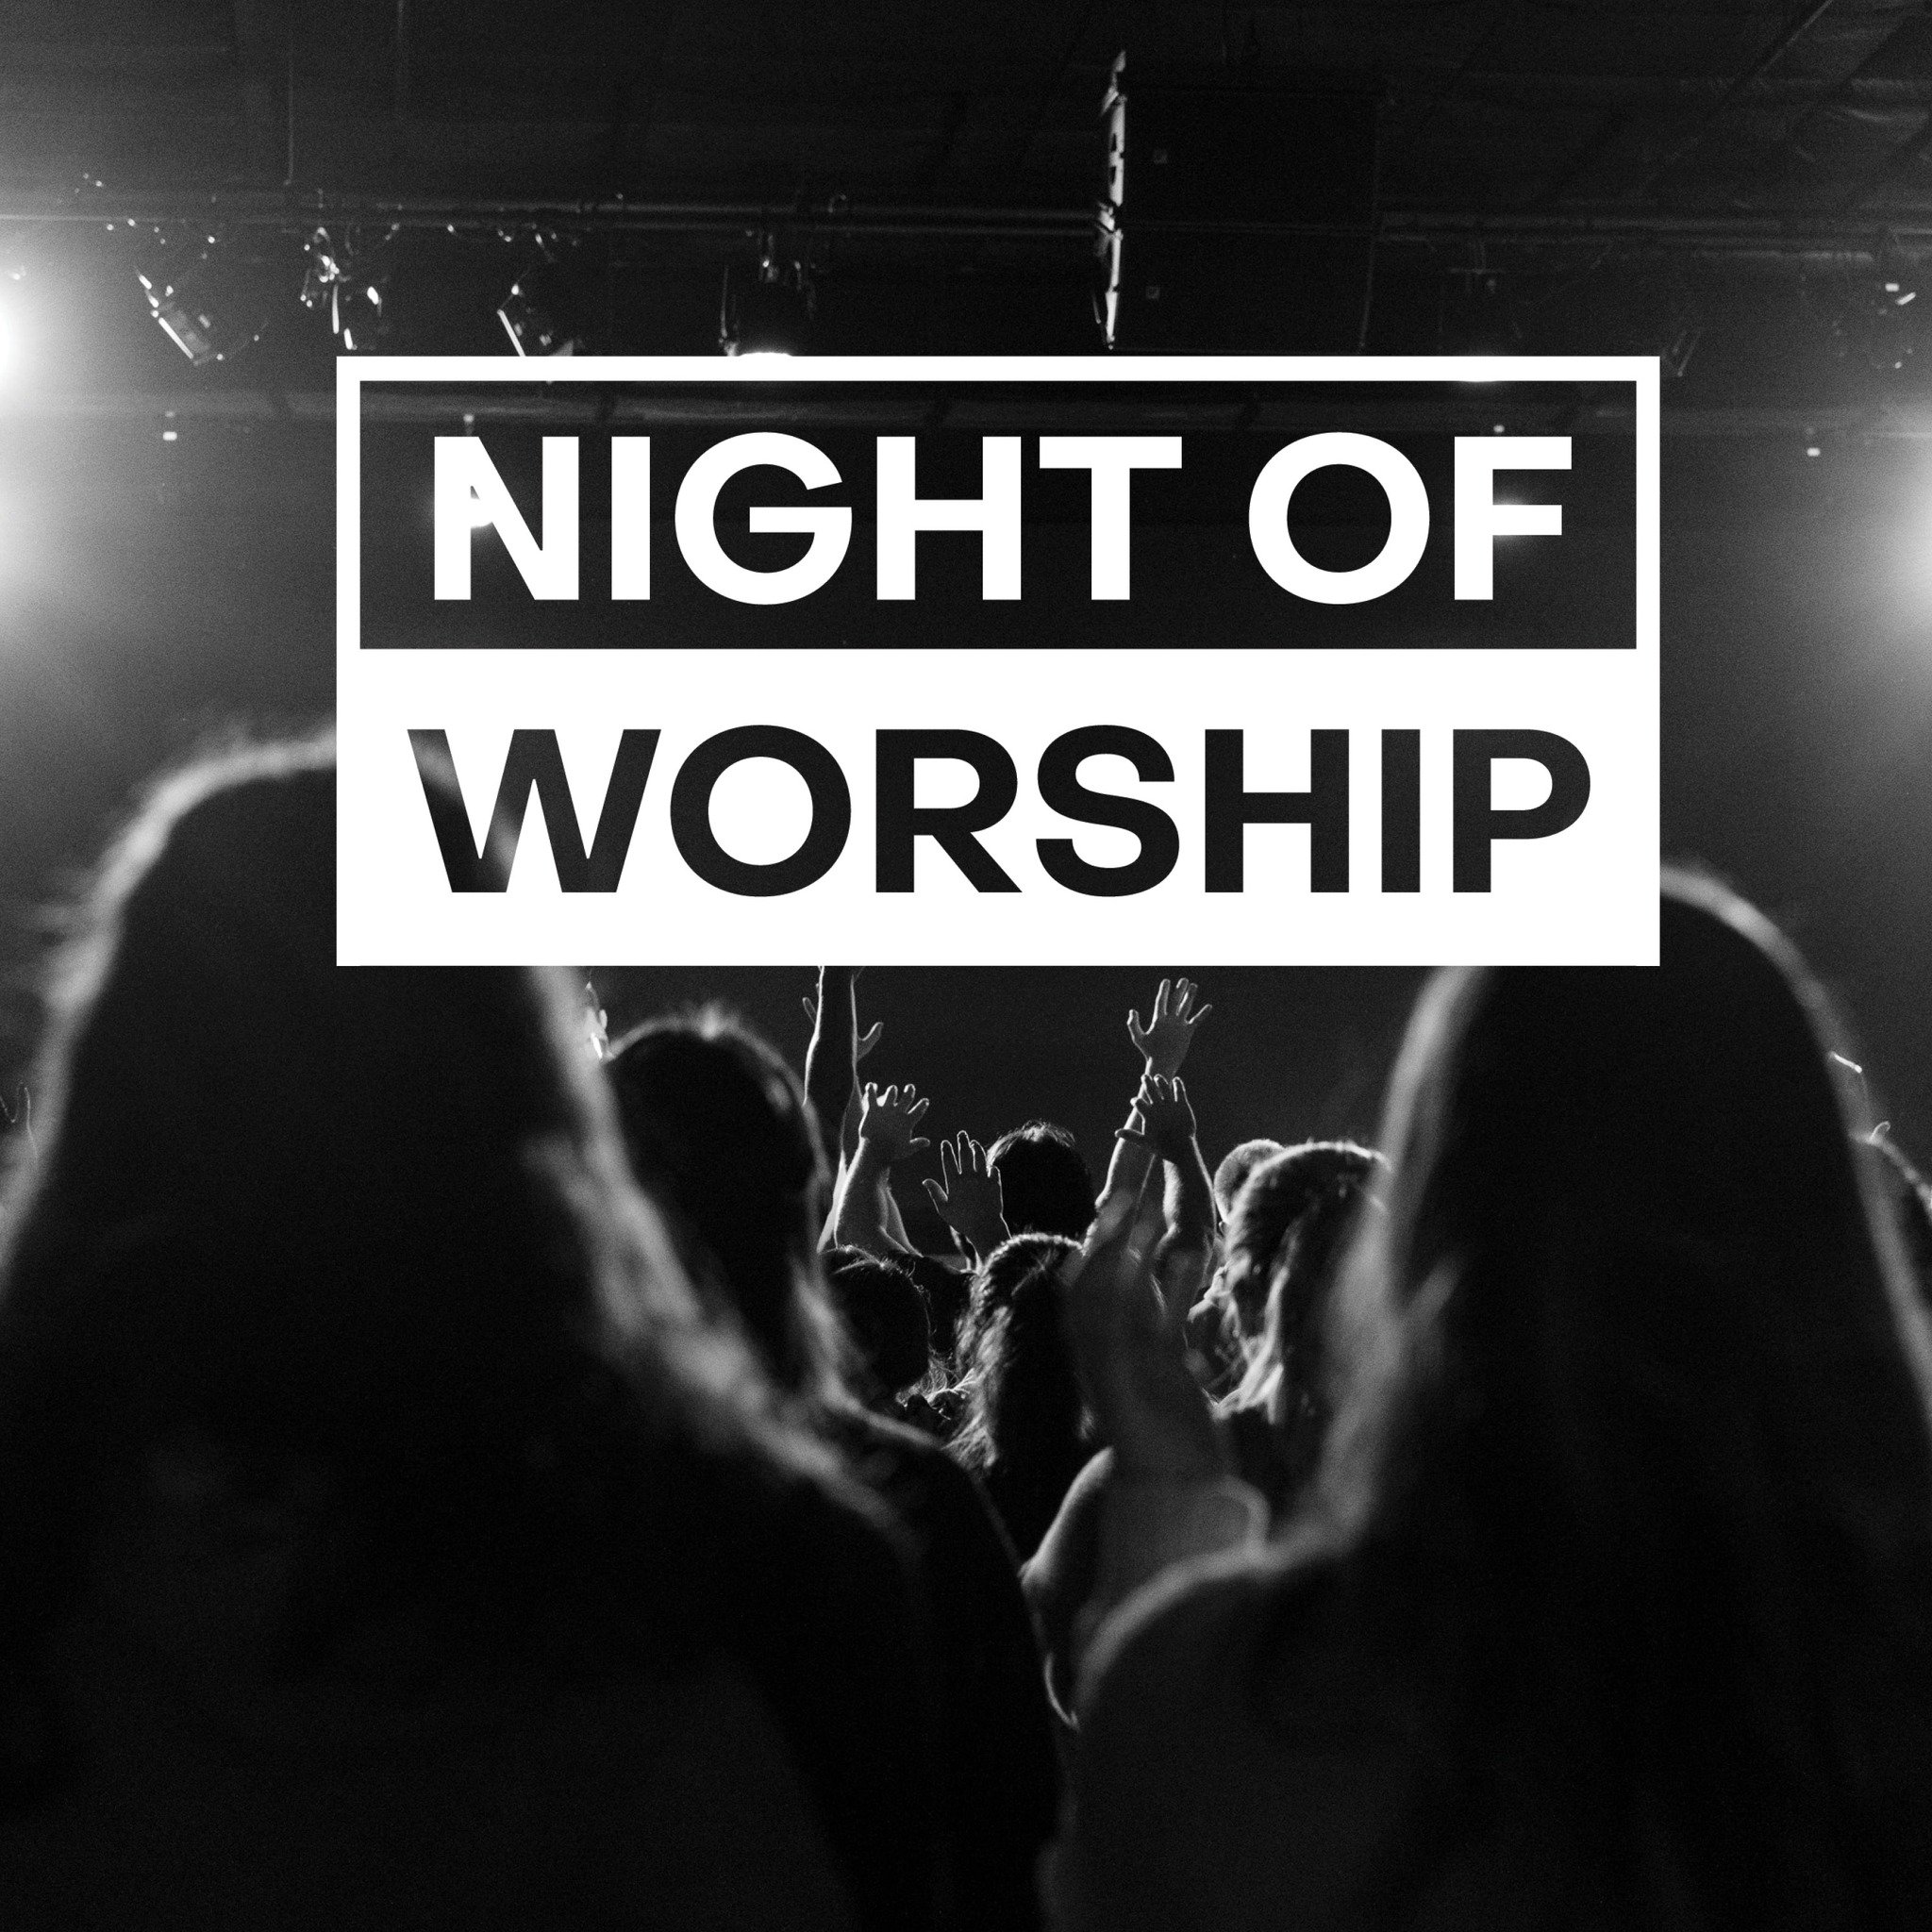 Tonight is the night! We're closing out the year with a night of worship as we celebrate what Jesus has done this year and how he will continue to be faithful to us! We'll start at 8p at Veritas, you know the deal!